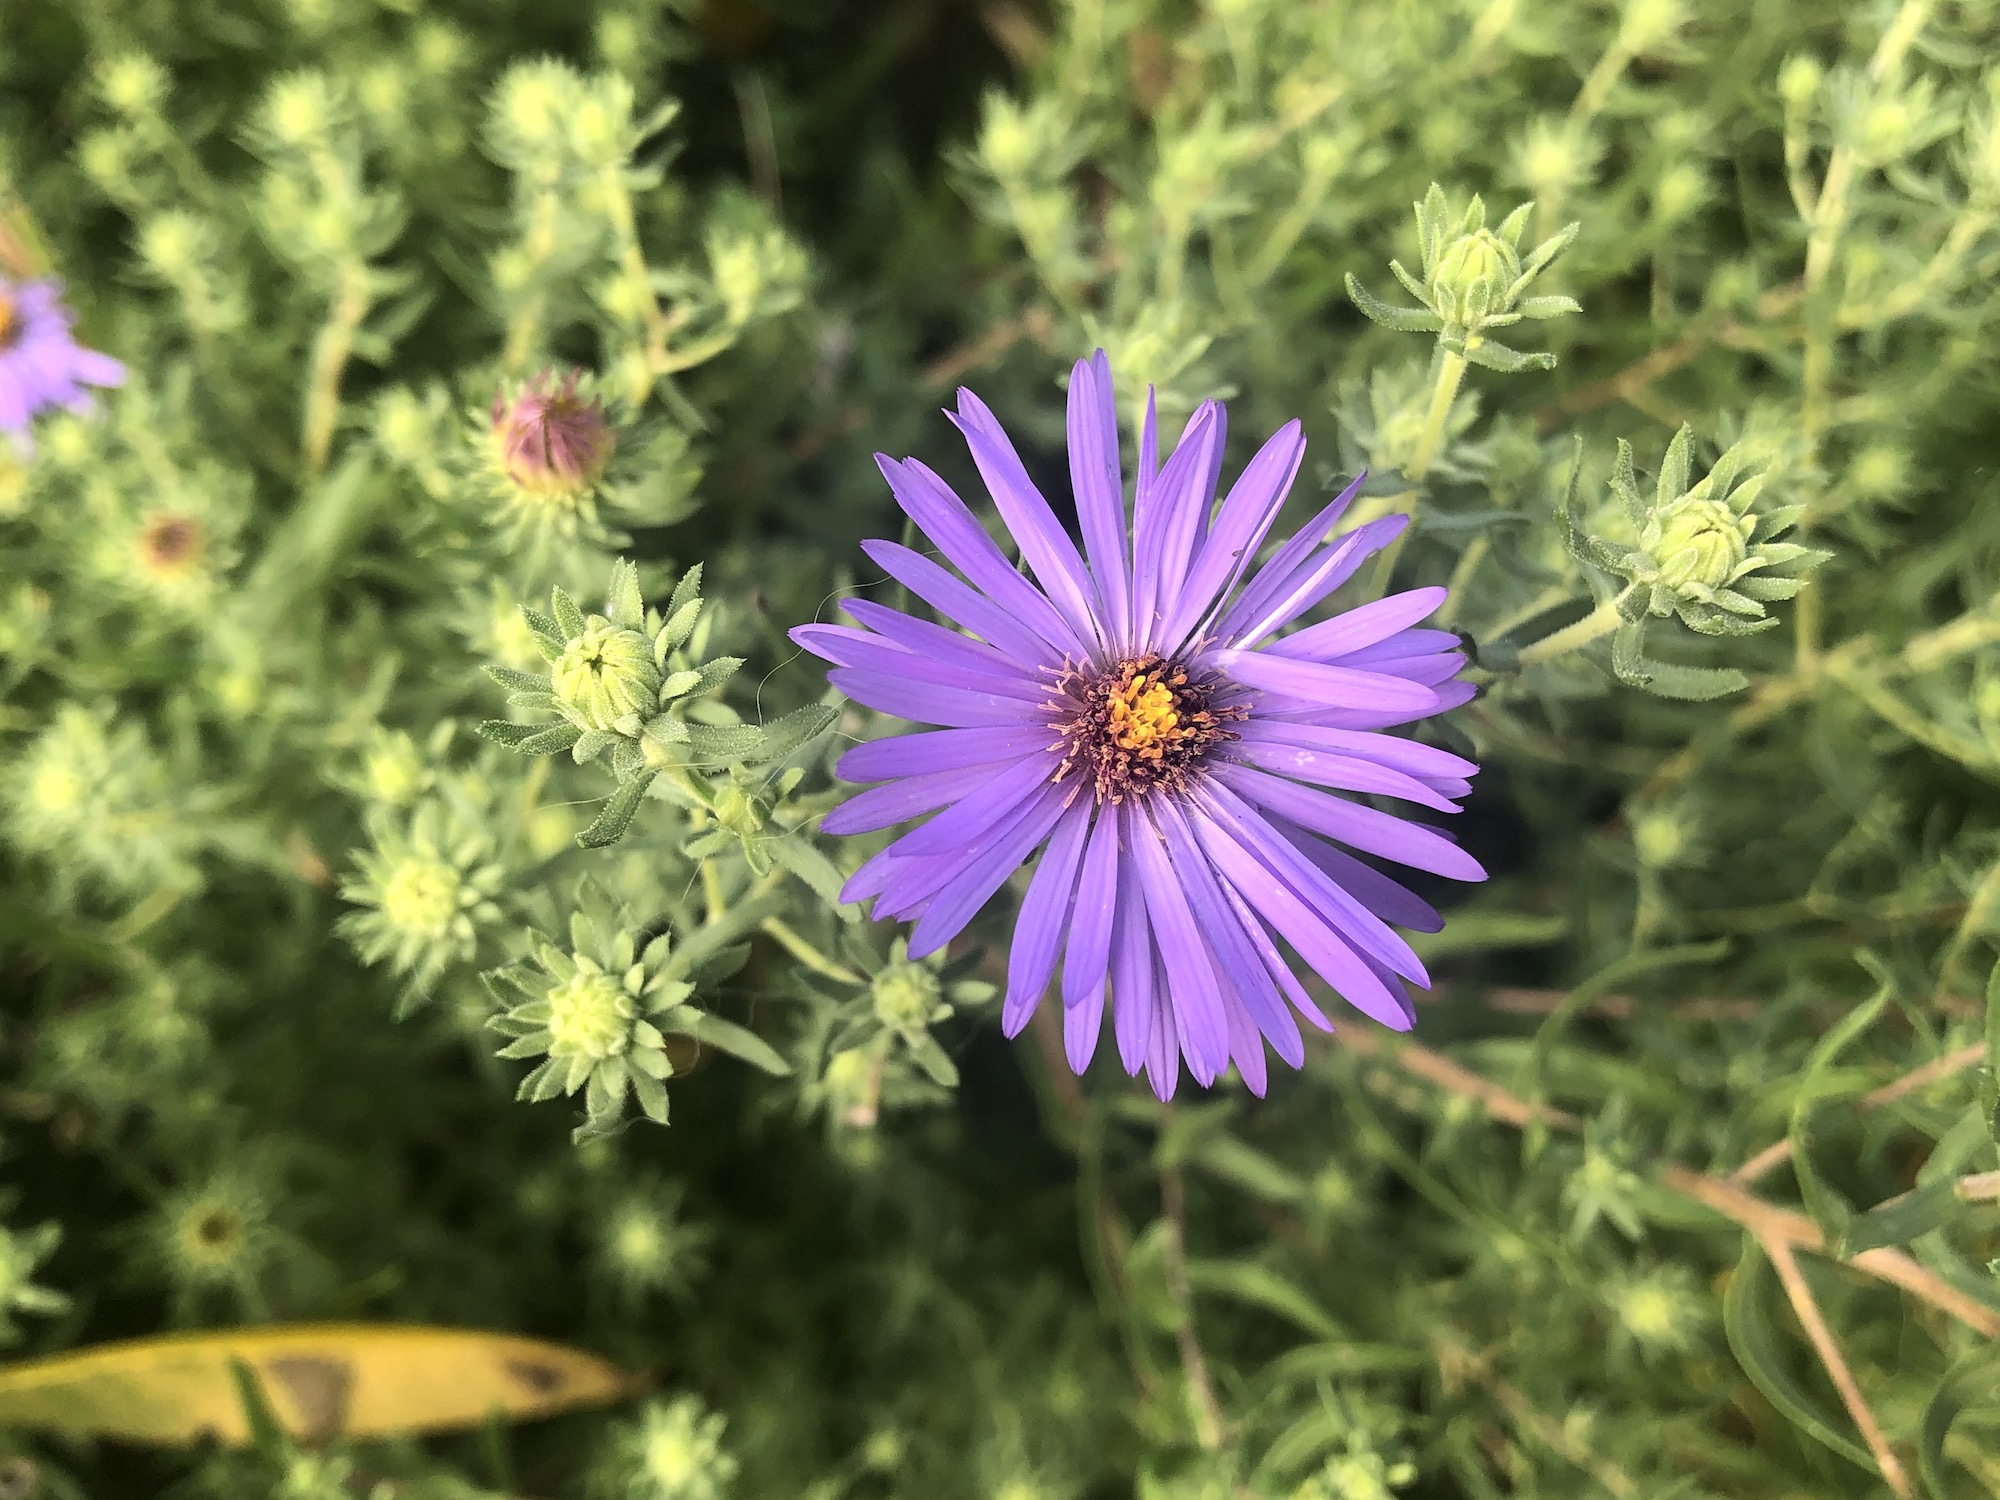 New England Aster in Oak Savanna in Madison, Wisconsin on September 8, 2021.